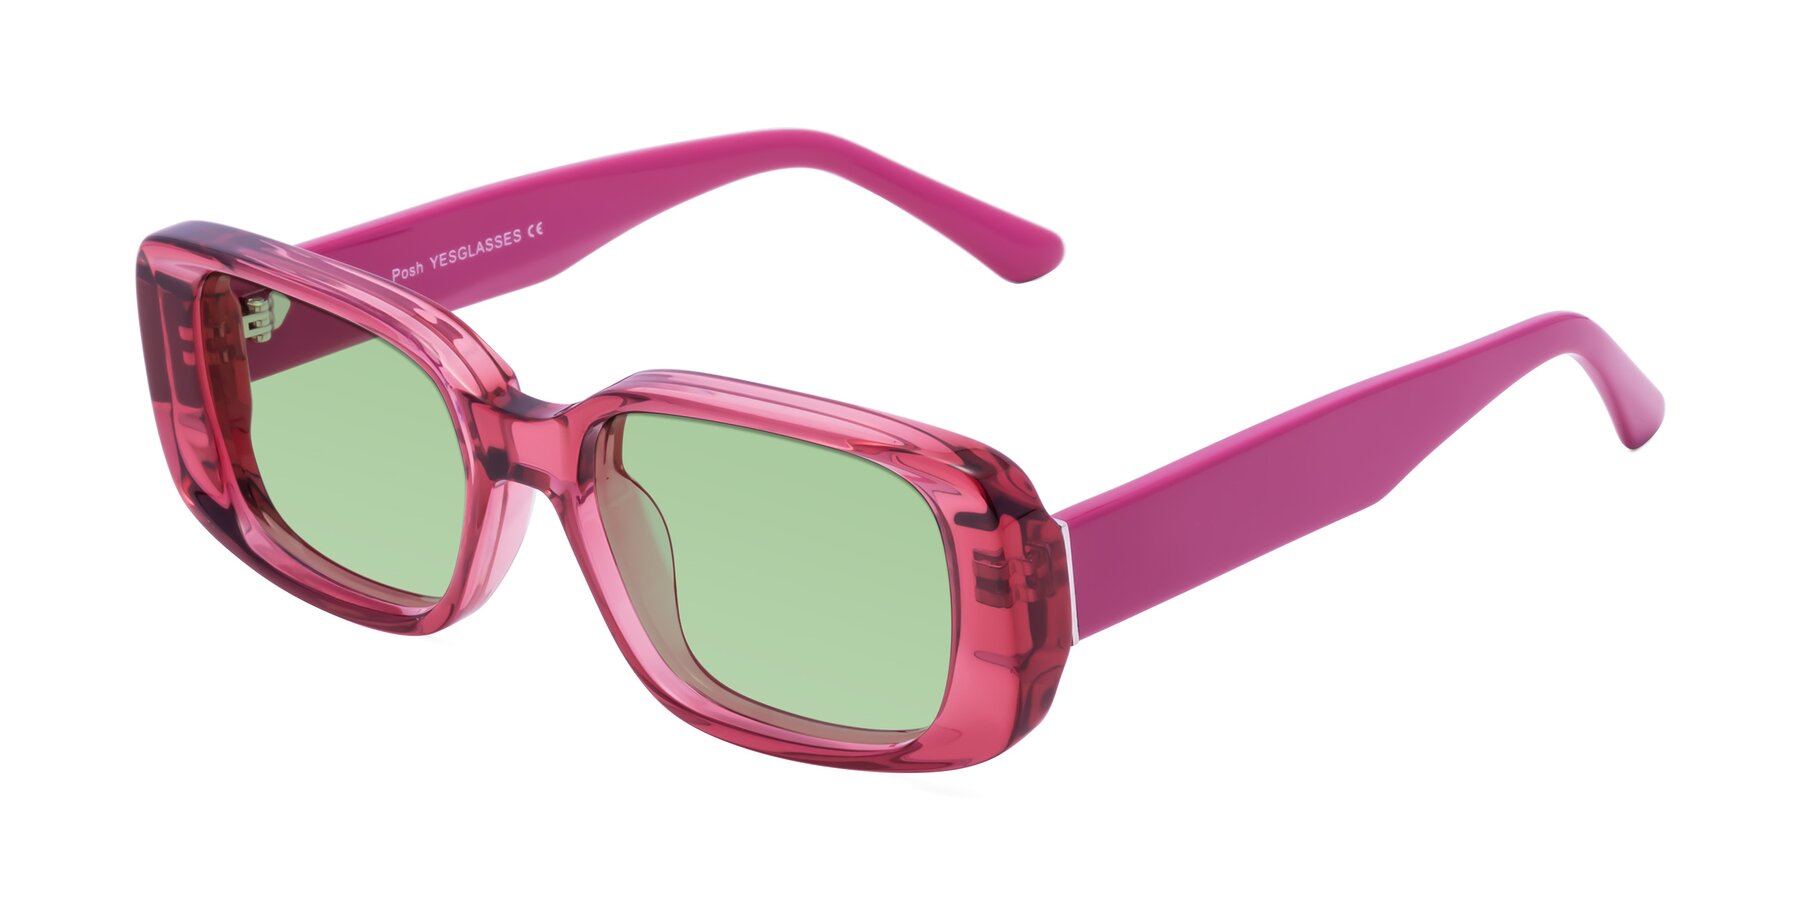 Angle of Posh in Transparent Pink with Medium Green Tinted Lenses